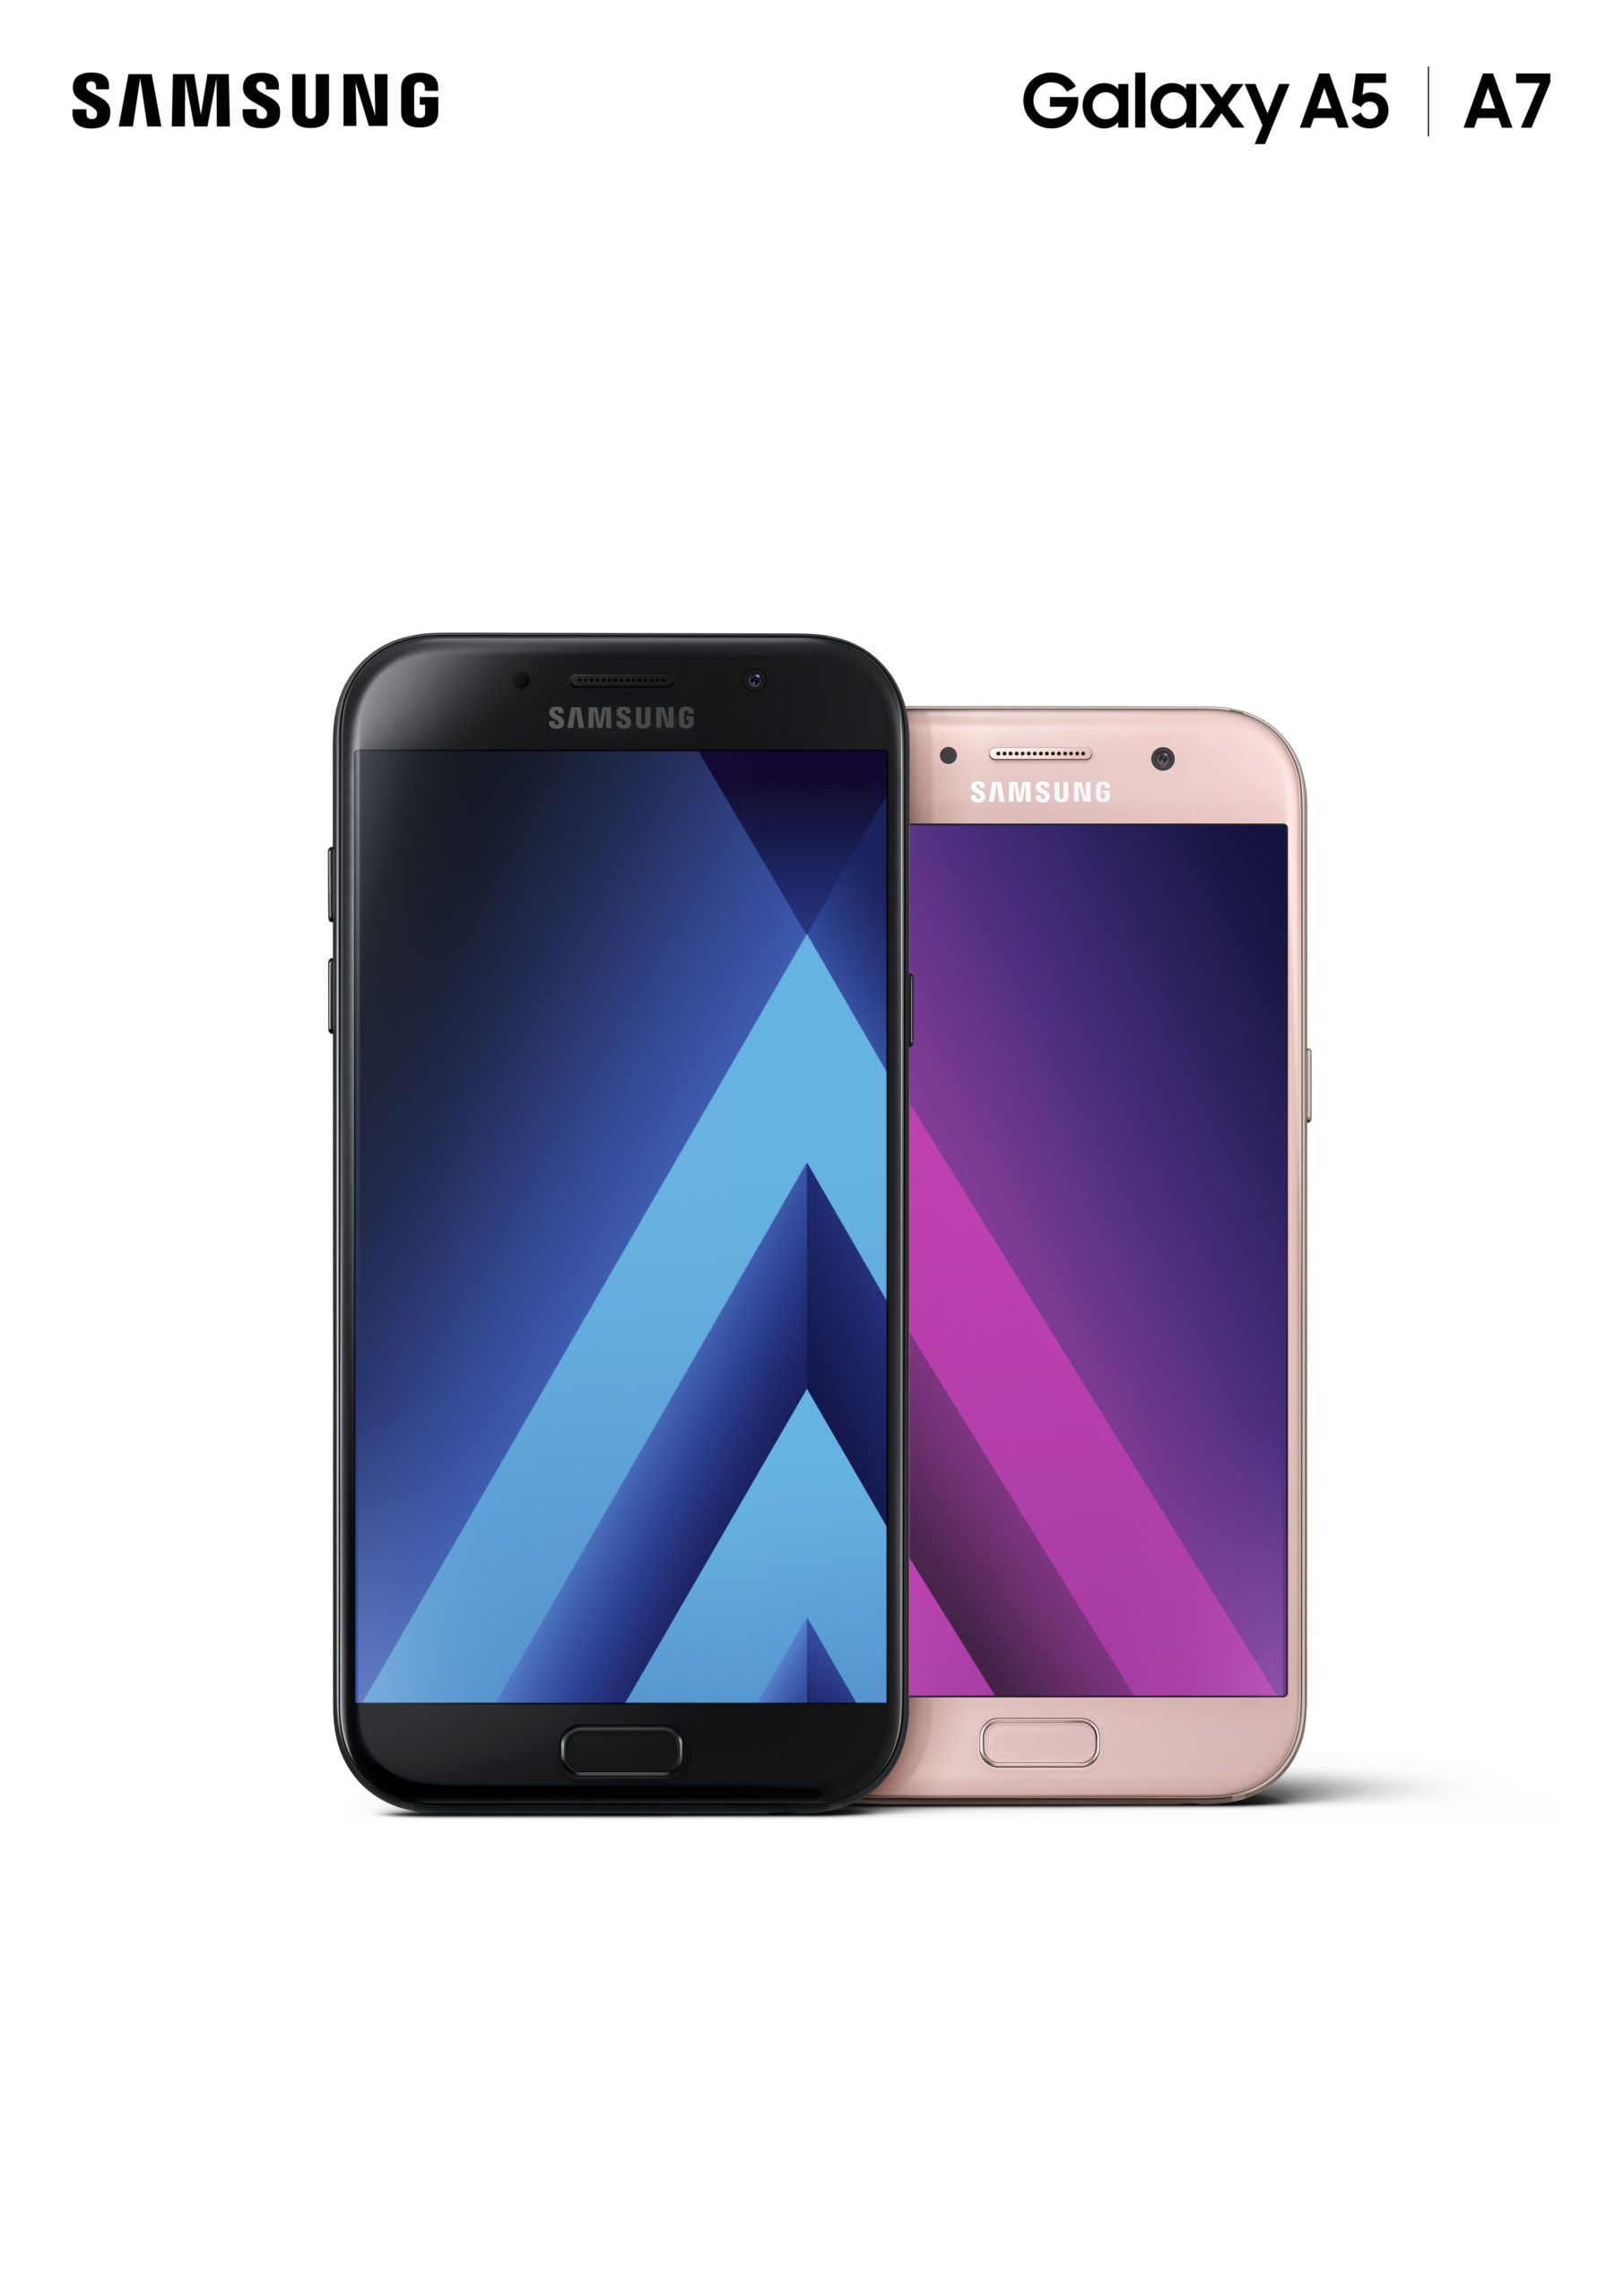 Samsung Introduces Galaxy A (2017) Series of Smartphones 1